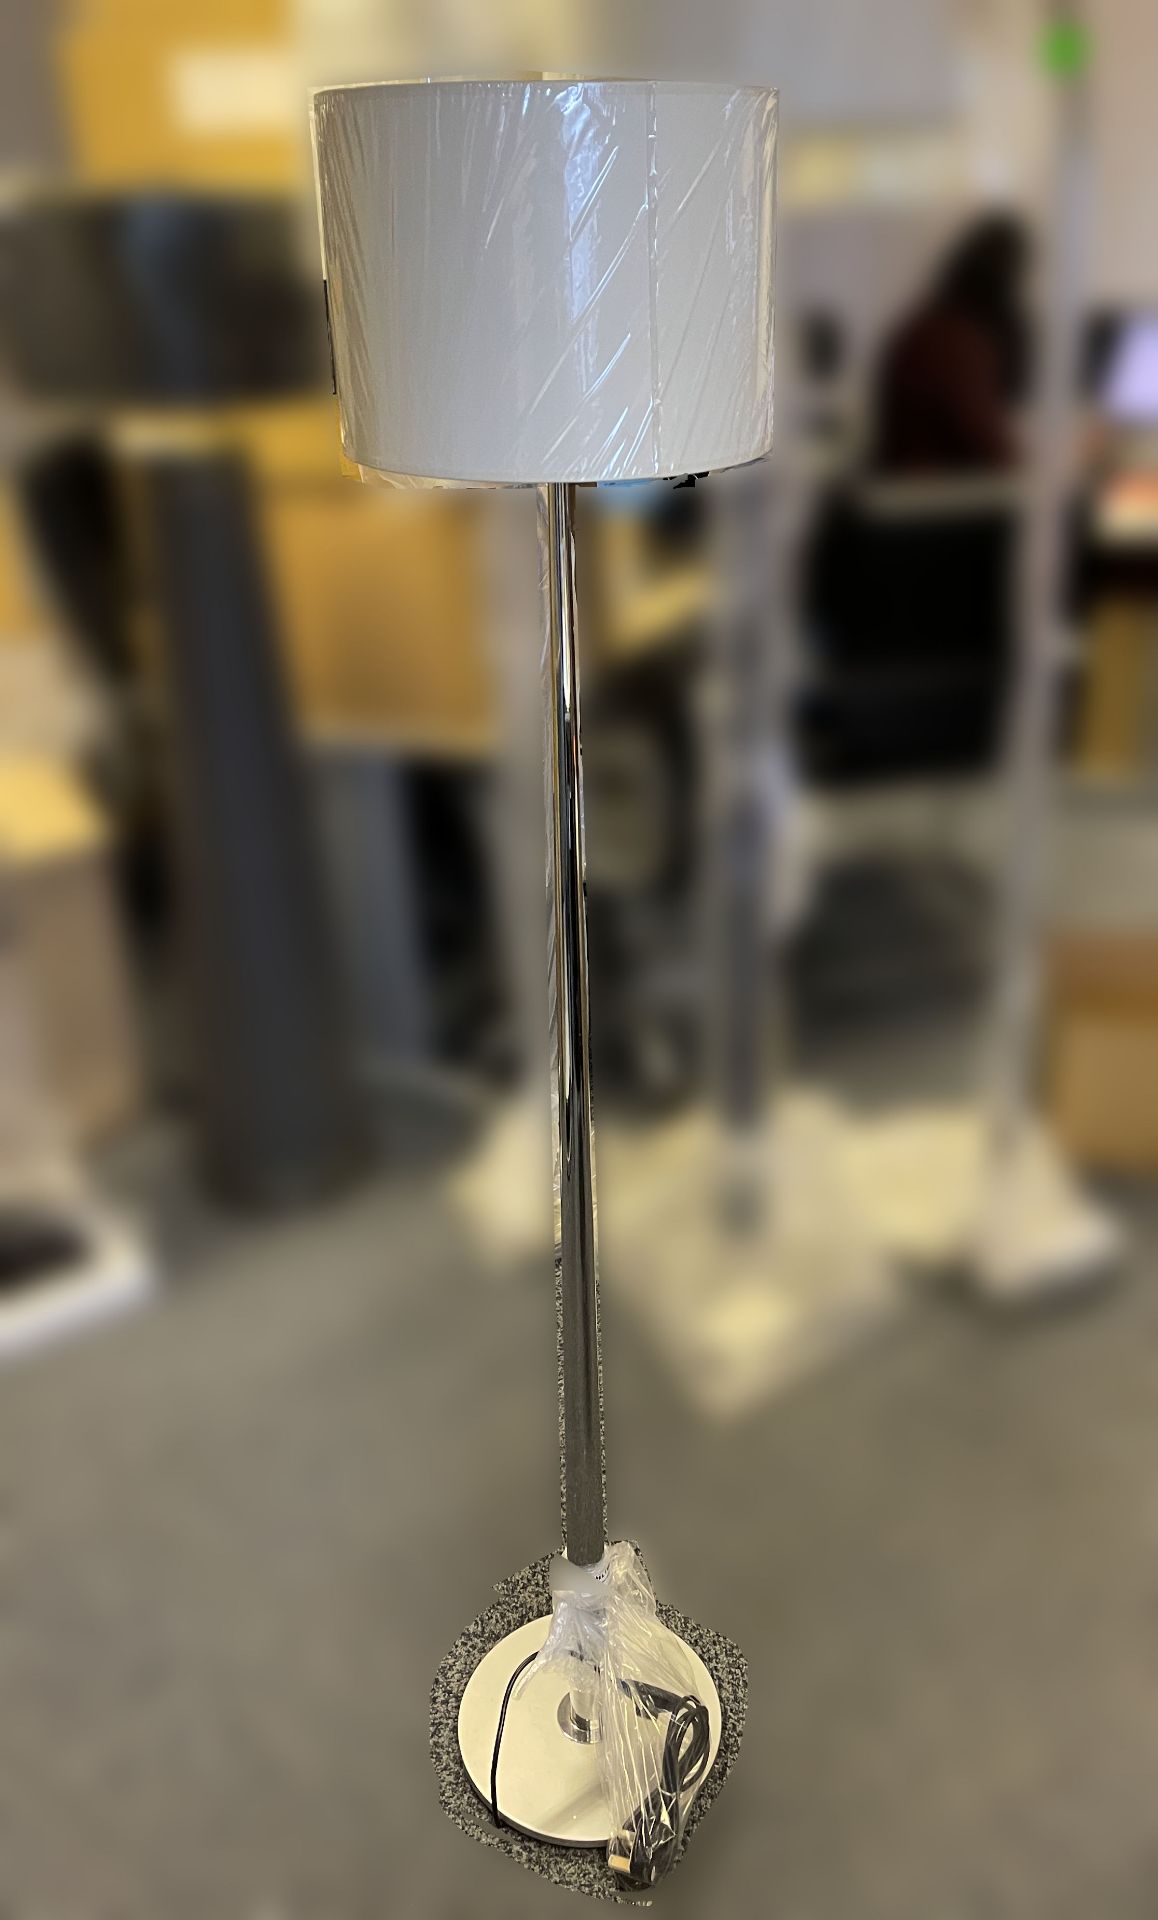 1 x Chelsom Polished Chrome Stem Floor Lamp height 155cm with Cream 31cm round shade - Ref: CHL198 - Image 6 of 10